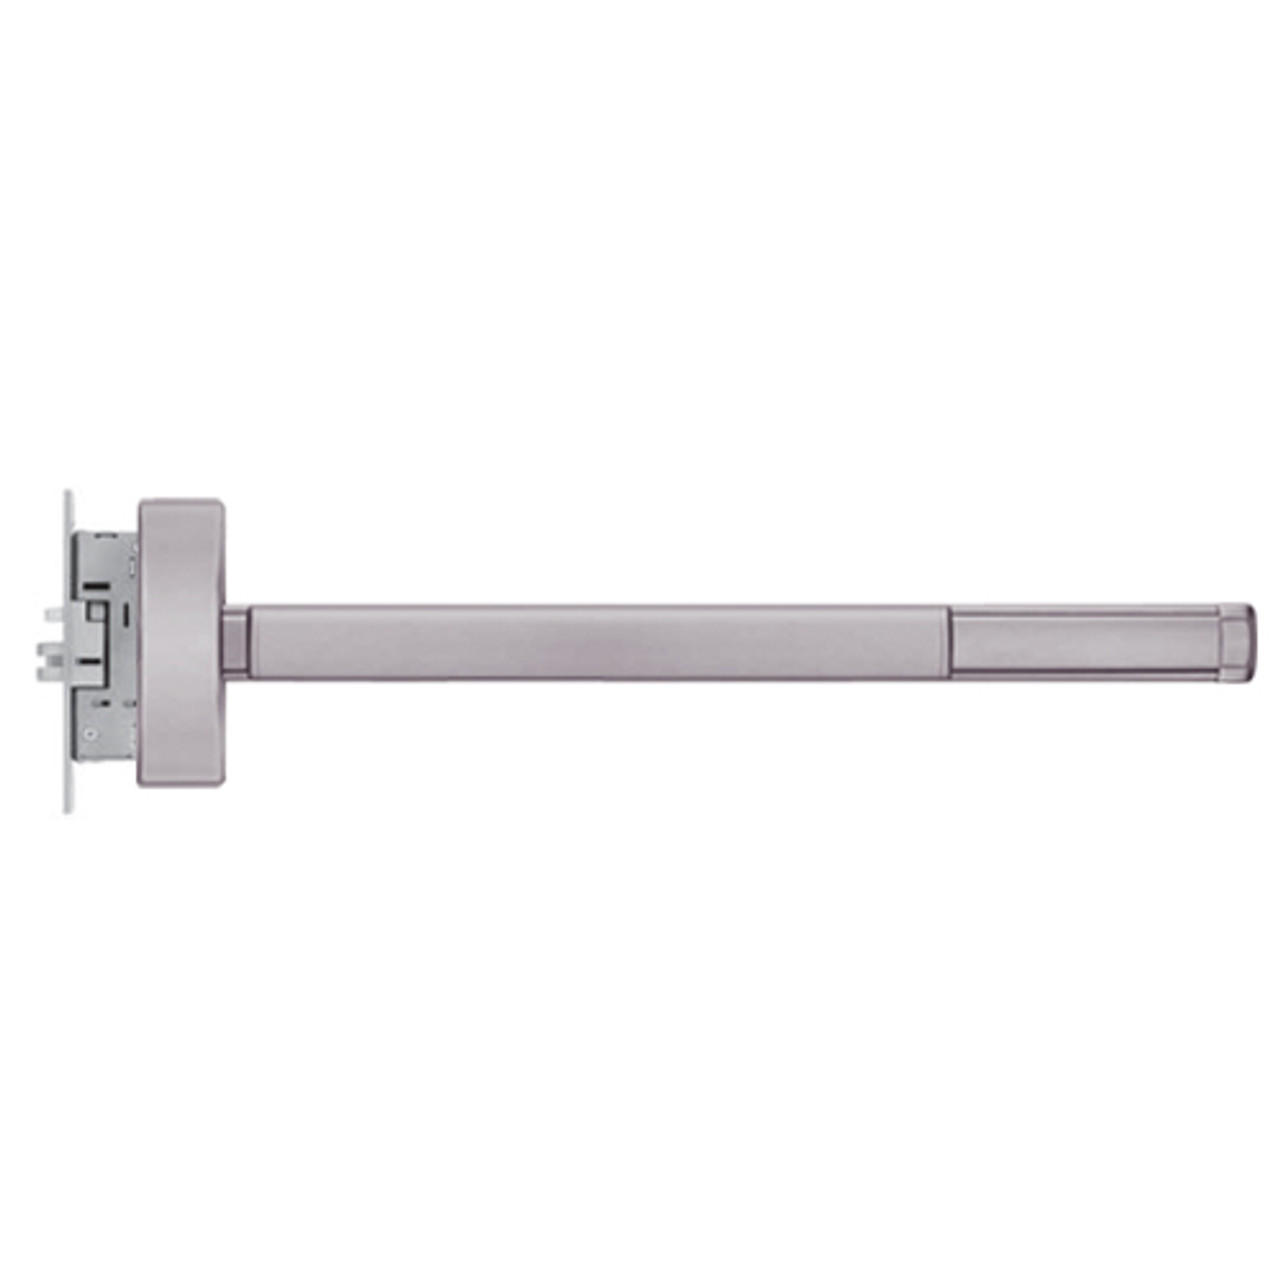 MLR2308-LHR-630-48 PHI 2300 Series Apex Mortise Exit Device with Motorized Latch Retraction Prepped for Key Controls Lever/Knob in Satin Stainless Steel Finish